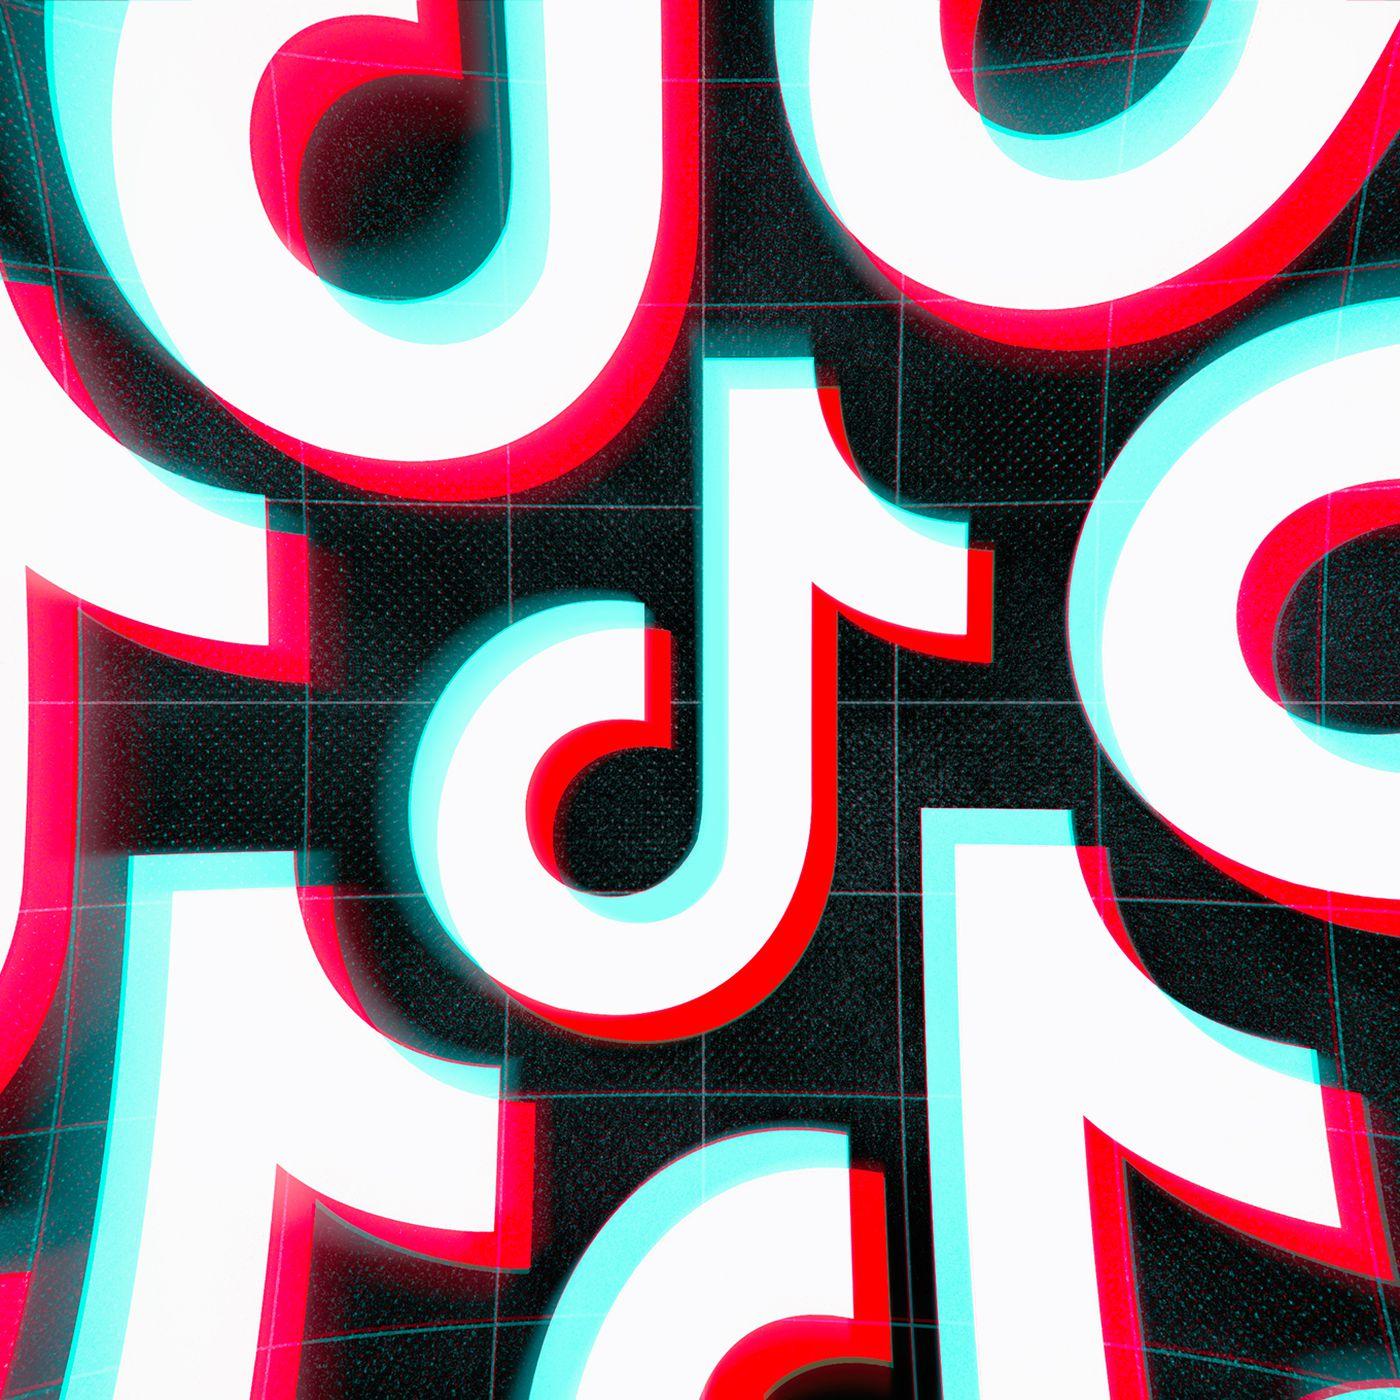 TikTok reveals some of the secrets, and blind spots, of its recommendation algorithm